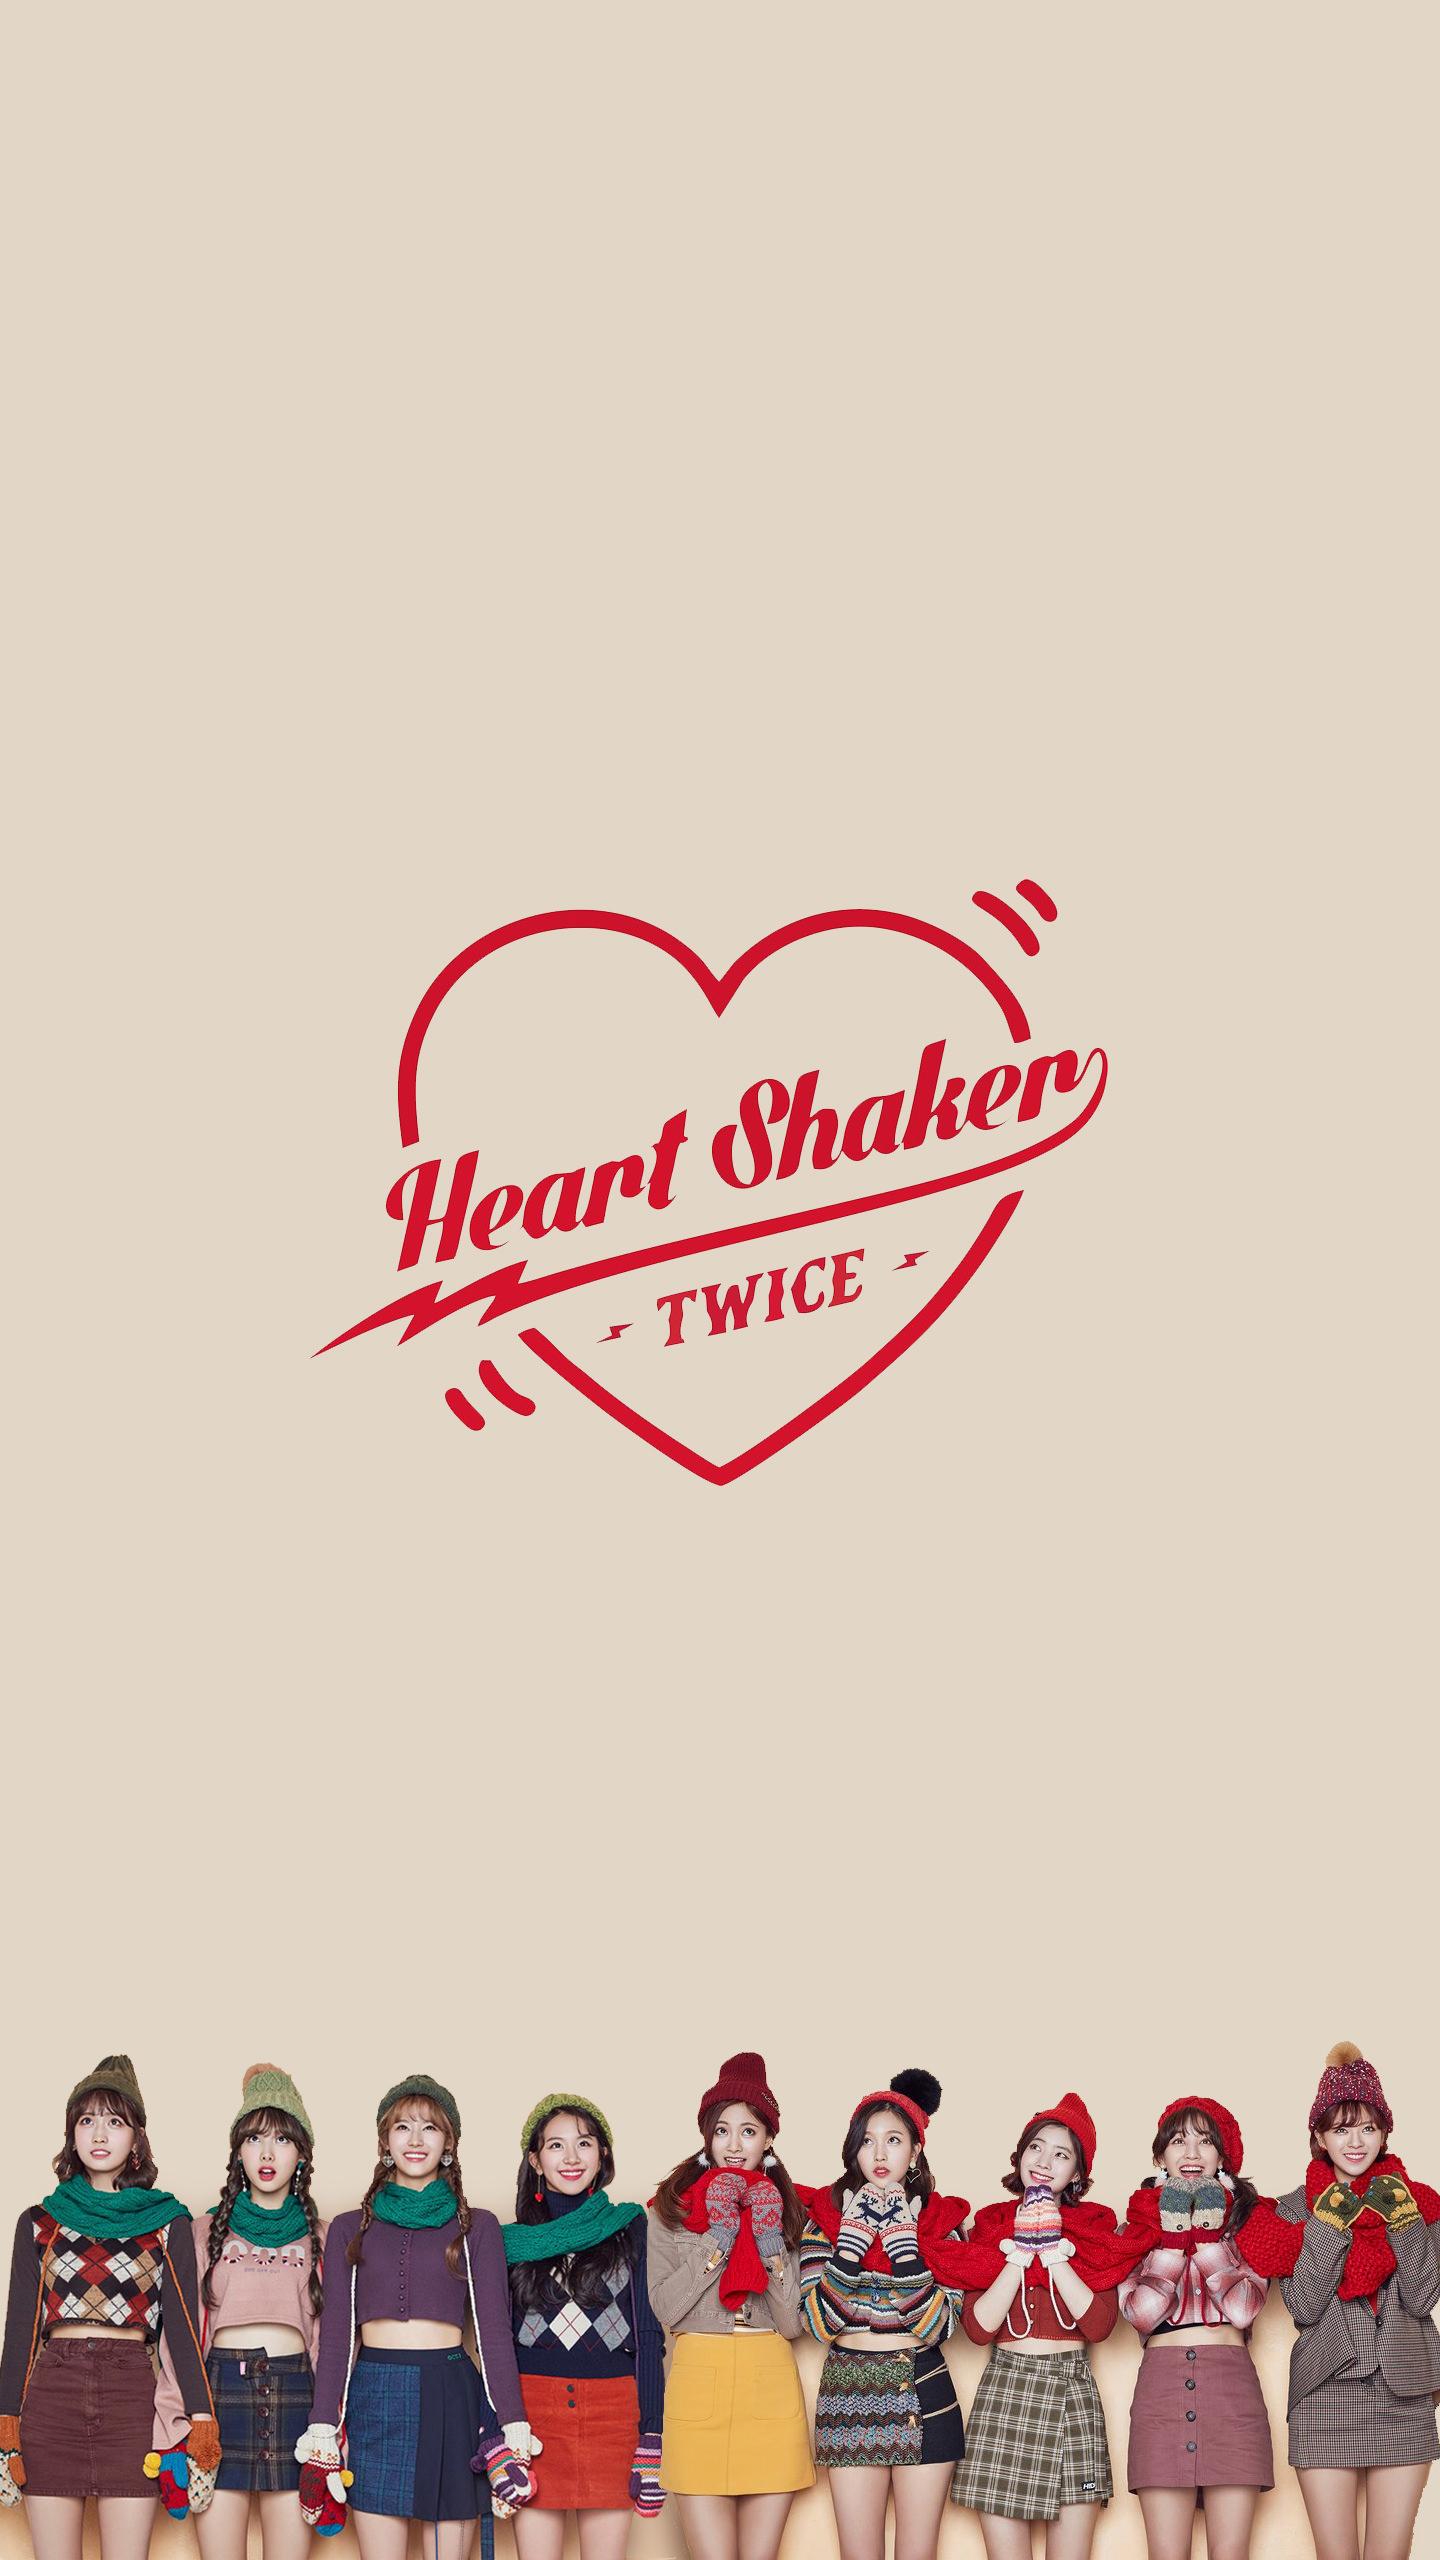 Made this really simple Heart Shaker phone wallpaper, Merry